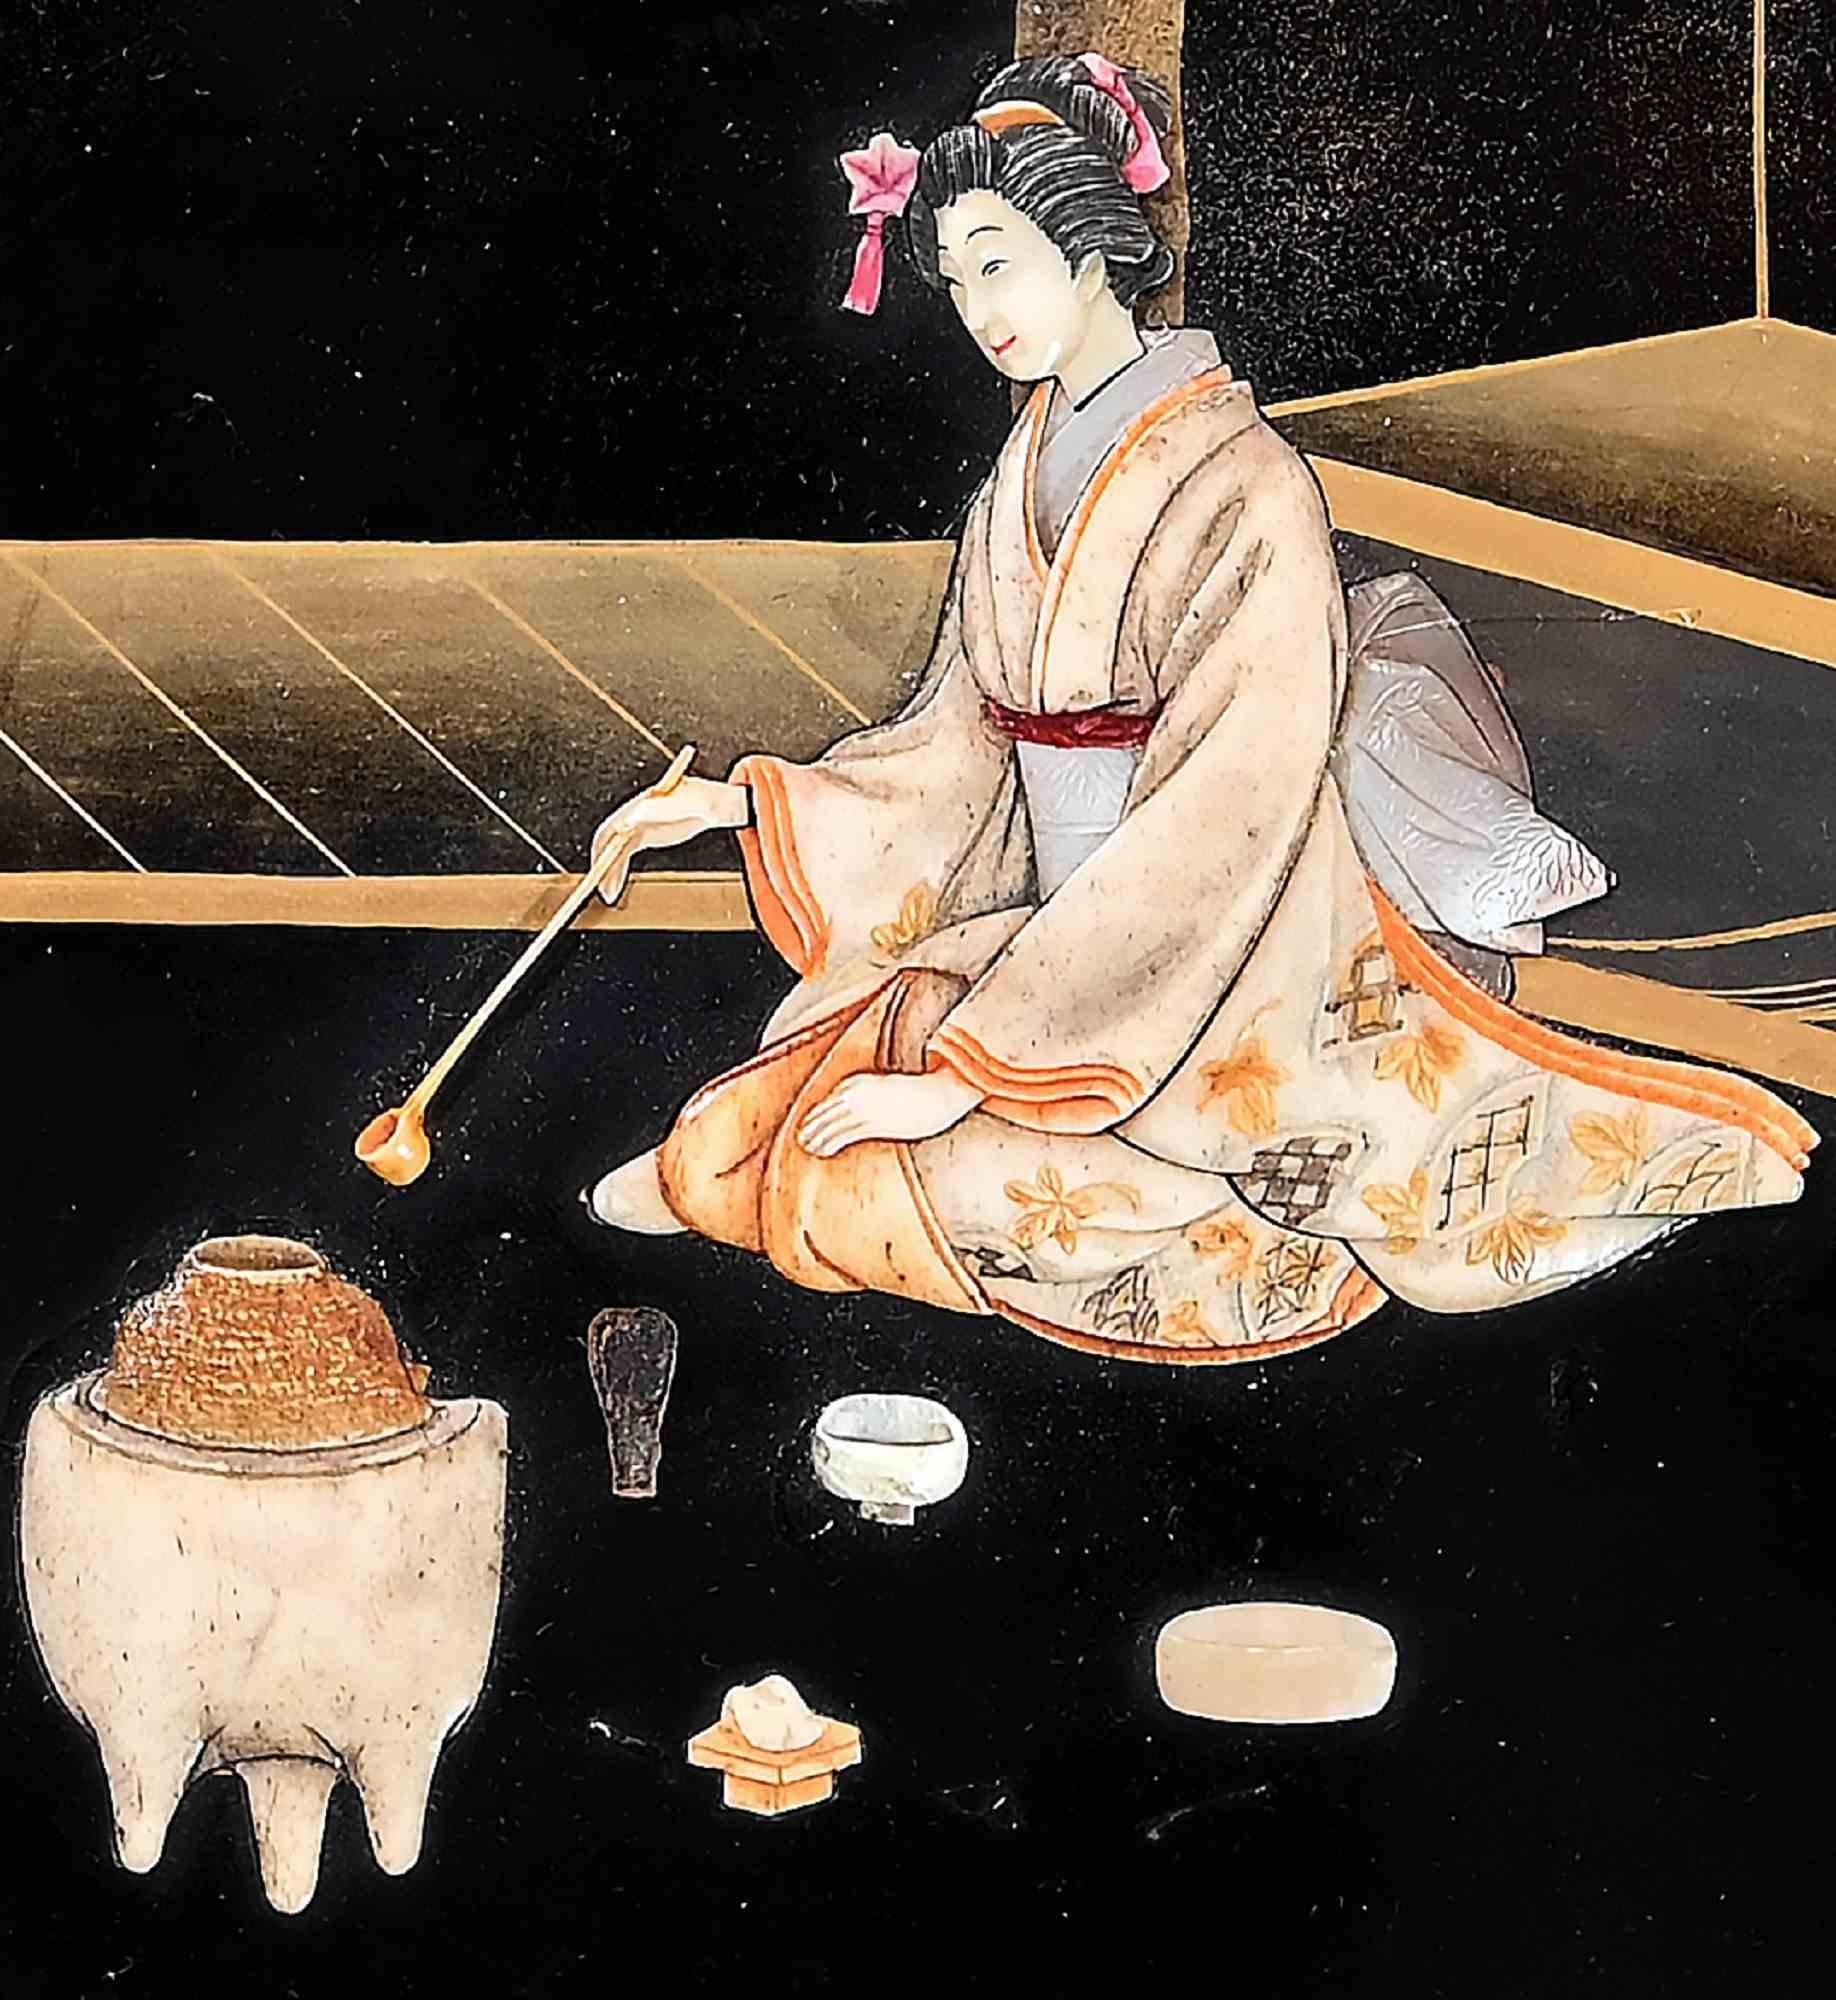 Tea Ceremony - Mixed Media - Early 20th century - Modern Mixed Media Art by Unknown